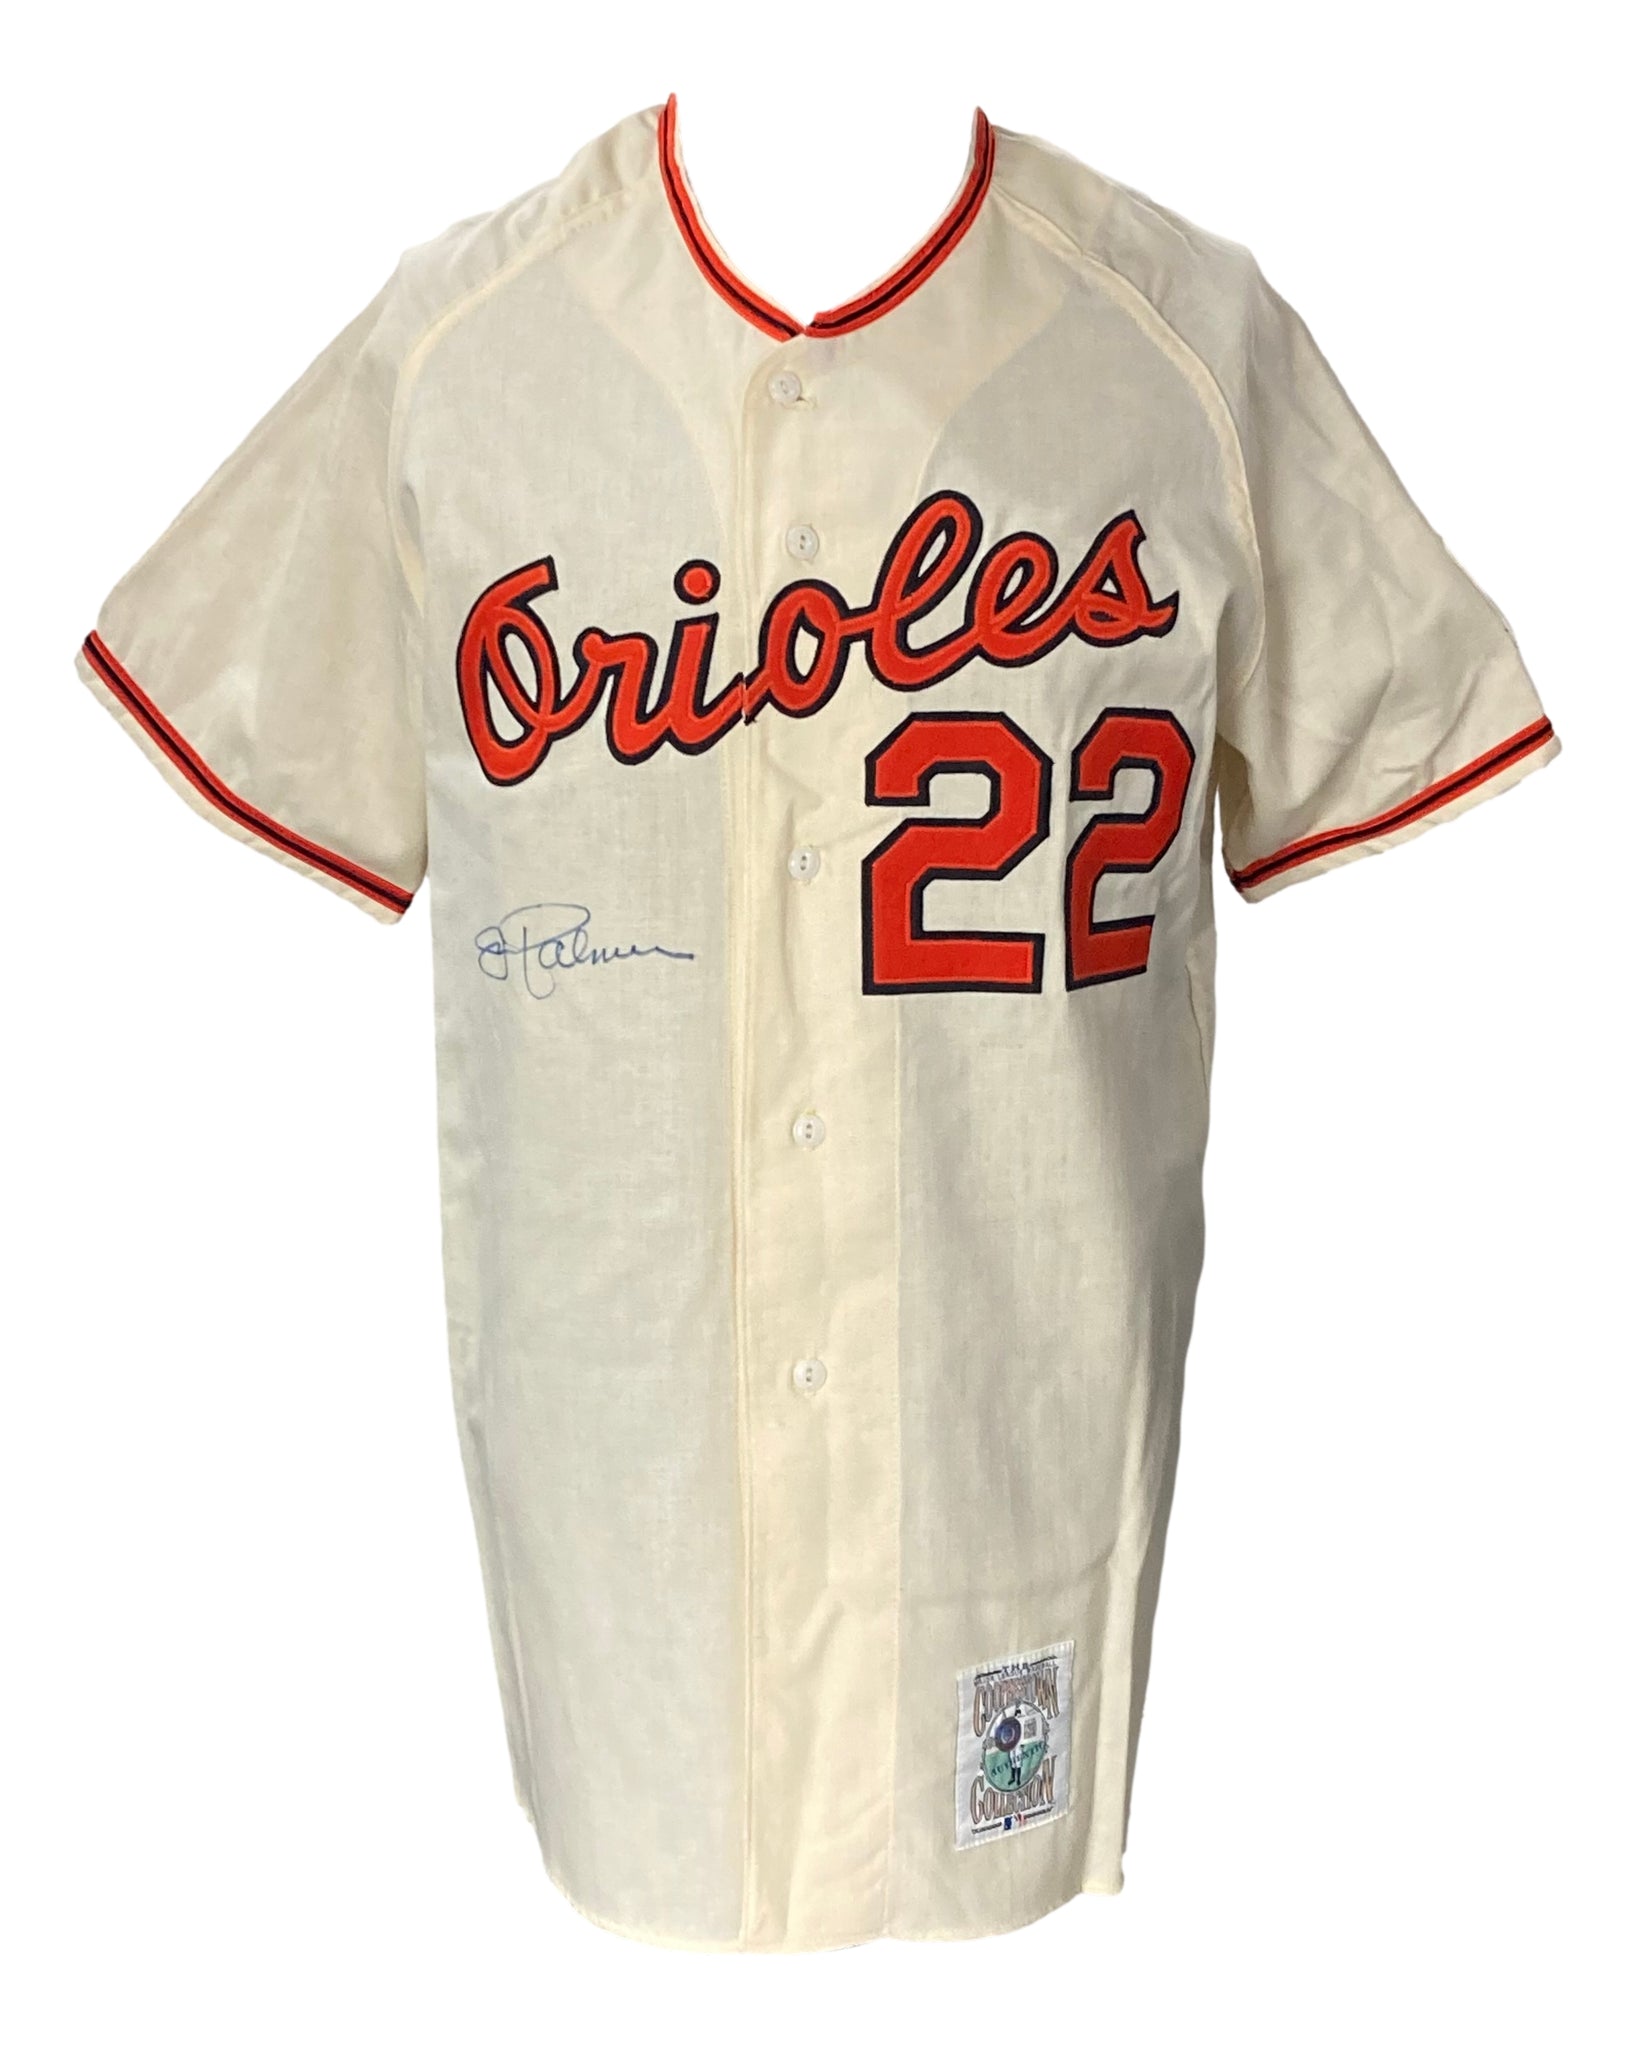 Sports Integrity Jim Palmer Signed Baltimore Orioles M&N Cooperstown Collection Jersey BAS